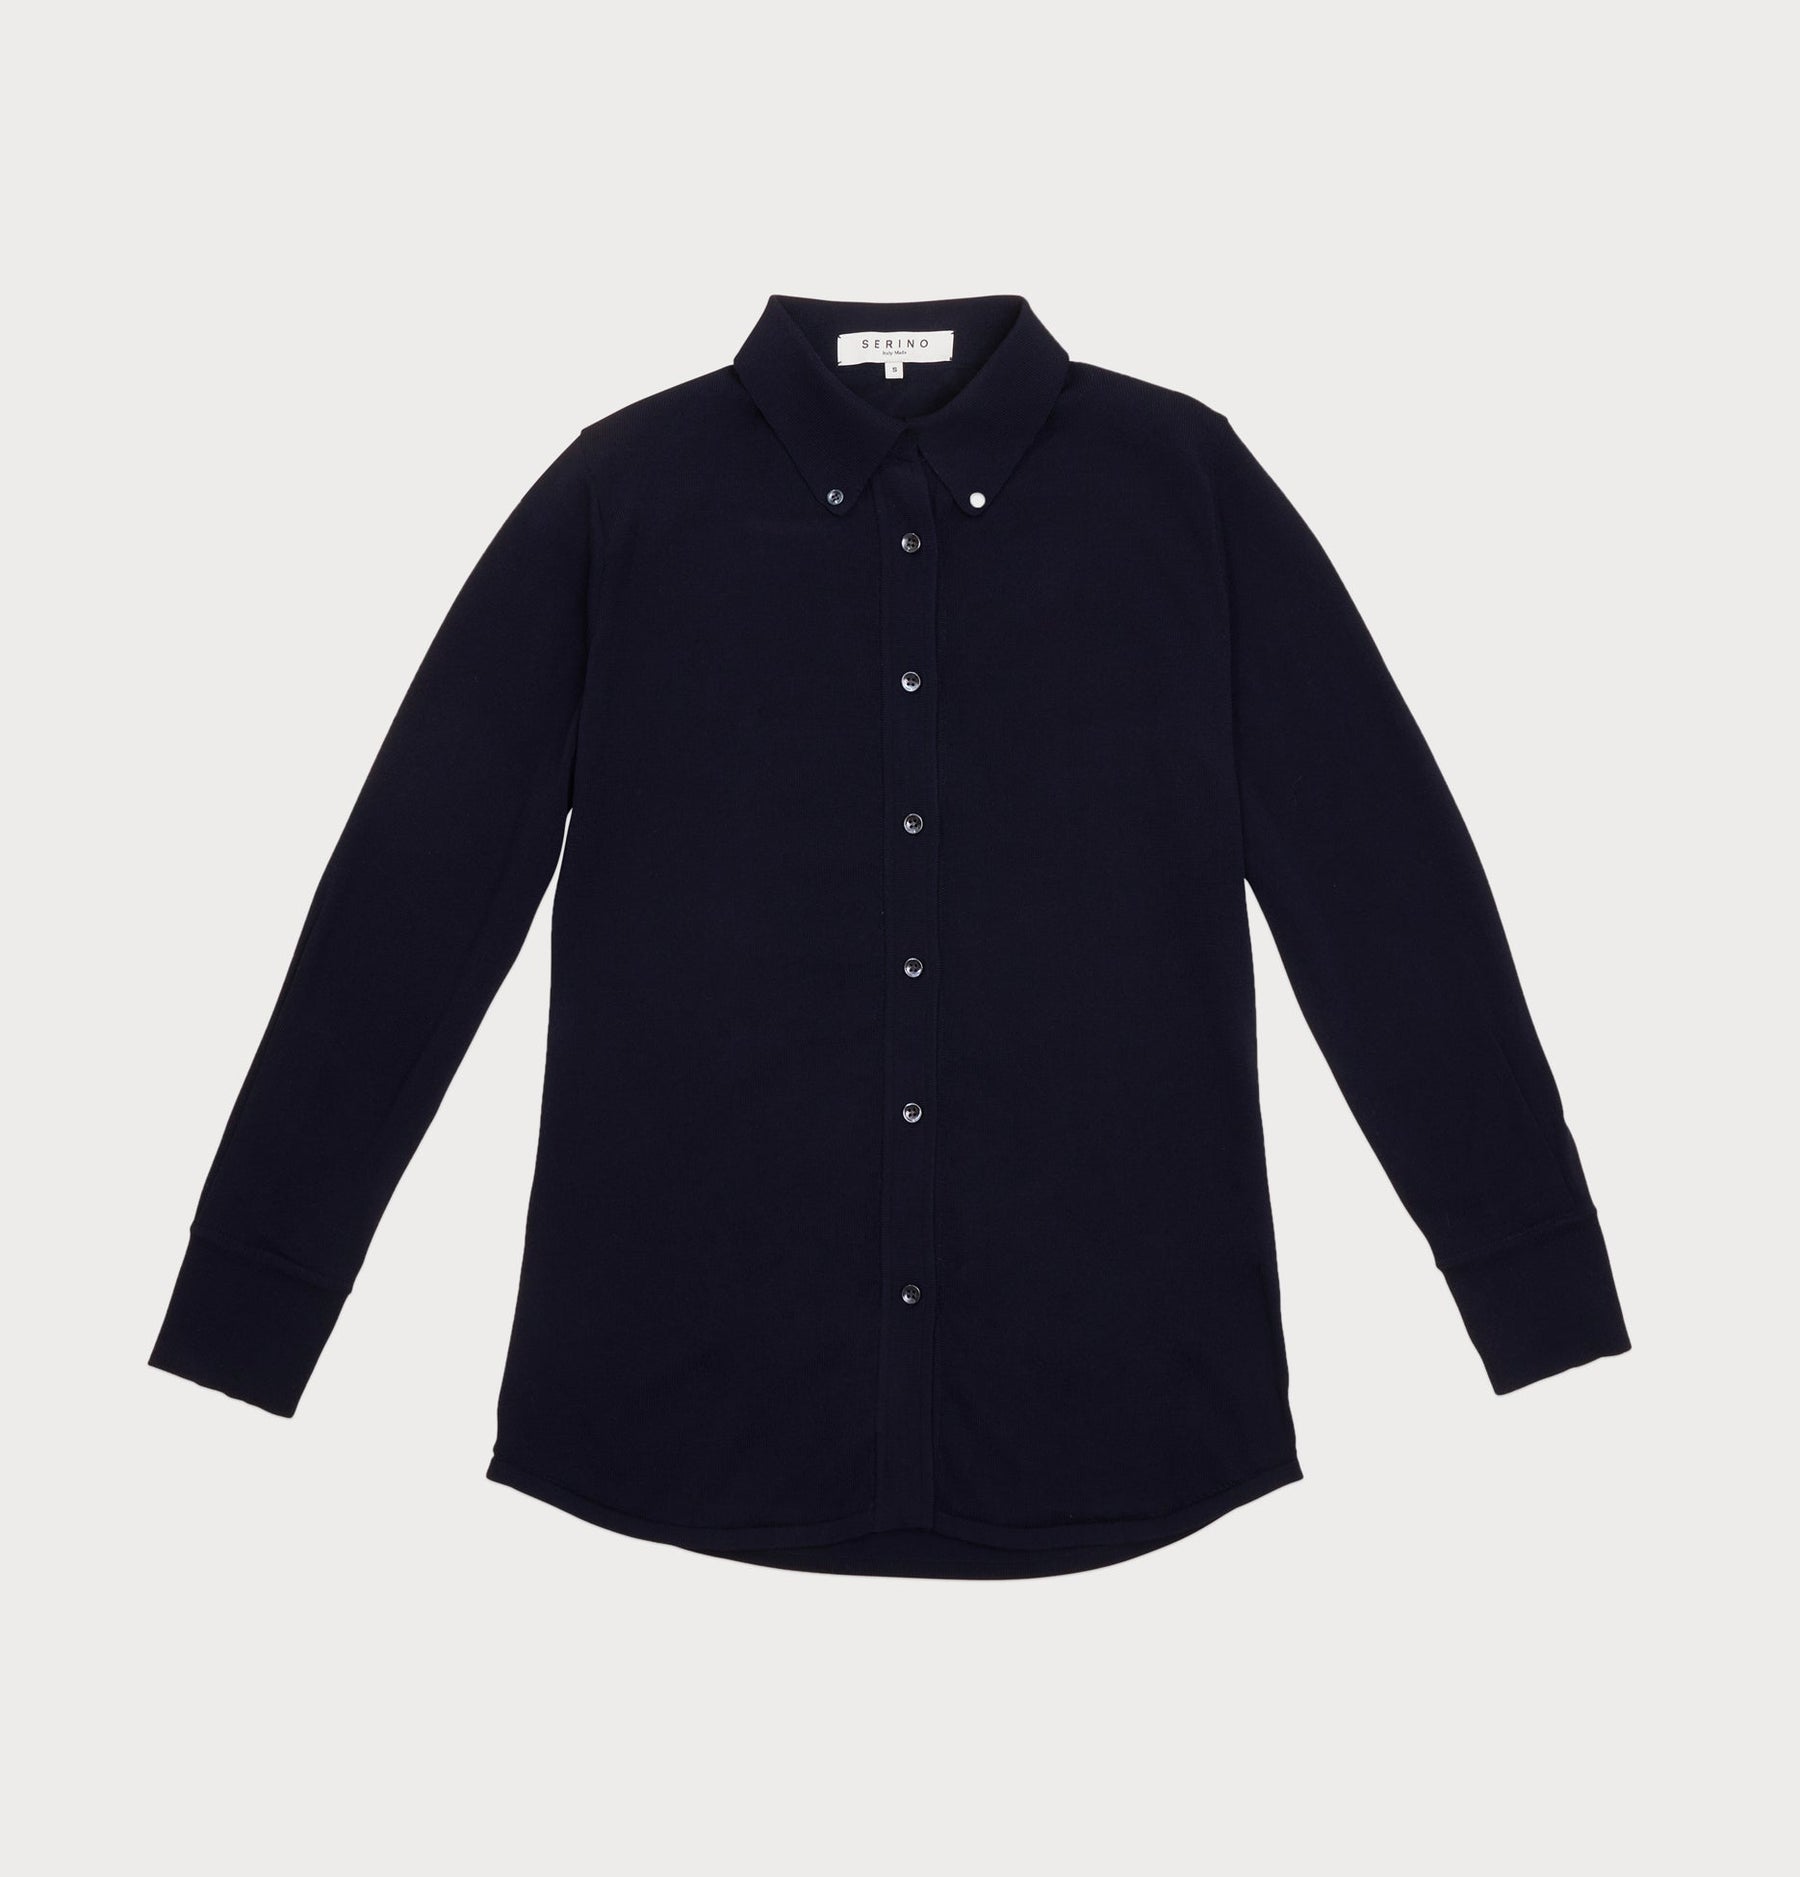 eco friendly button up shirt in navy made from organic cotton